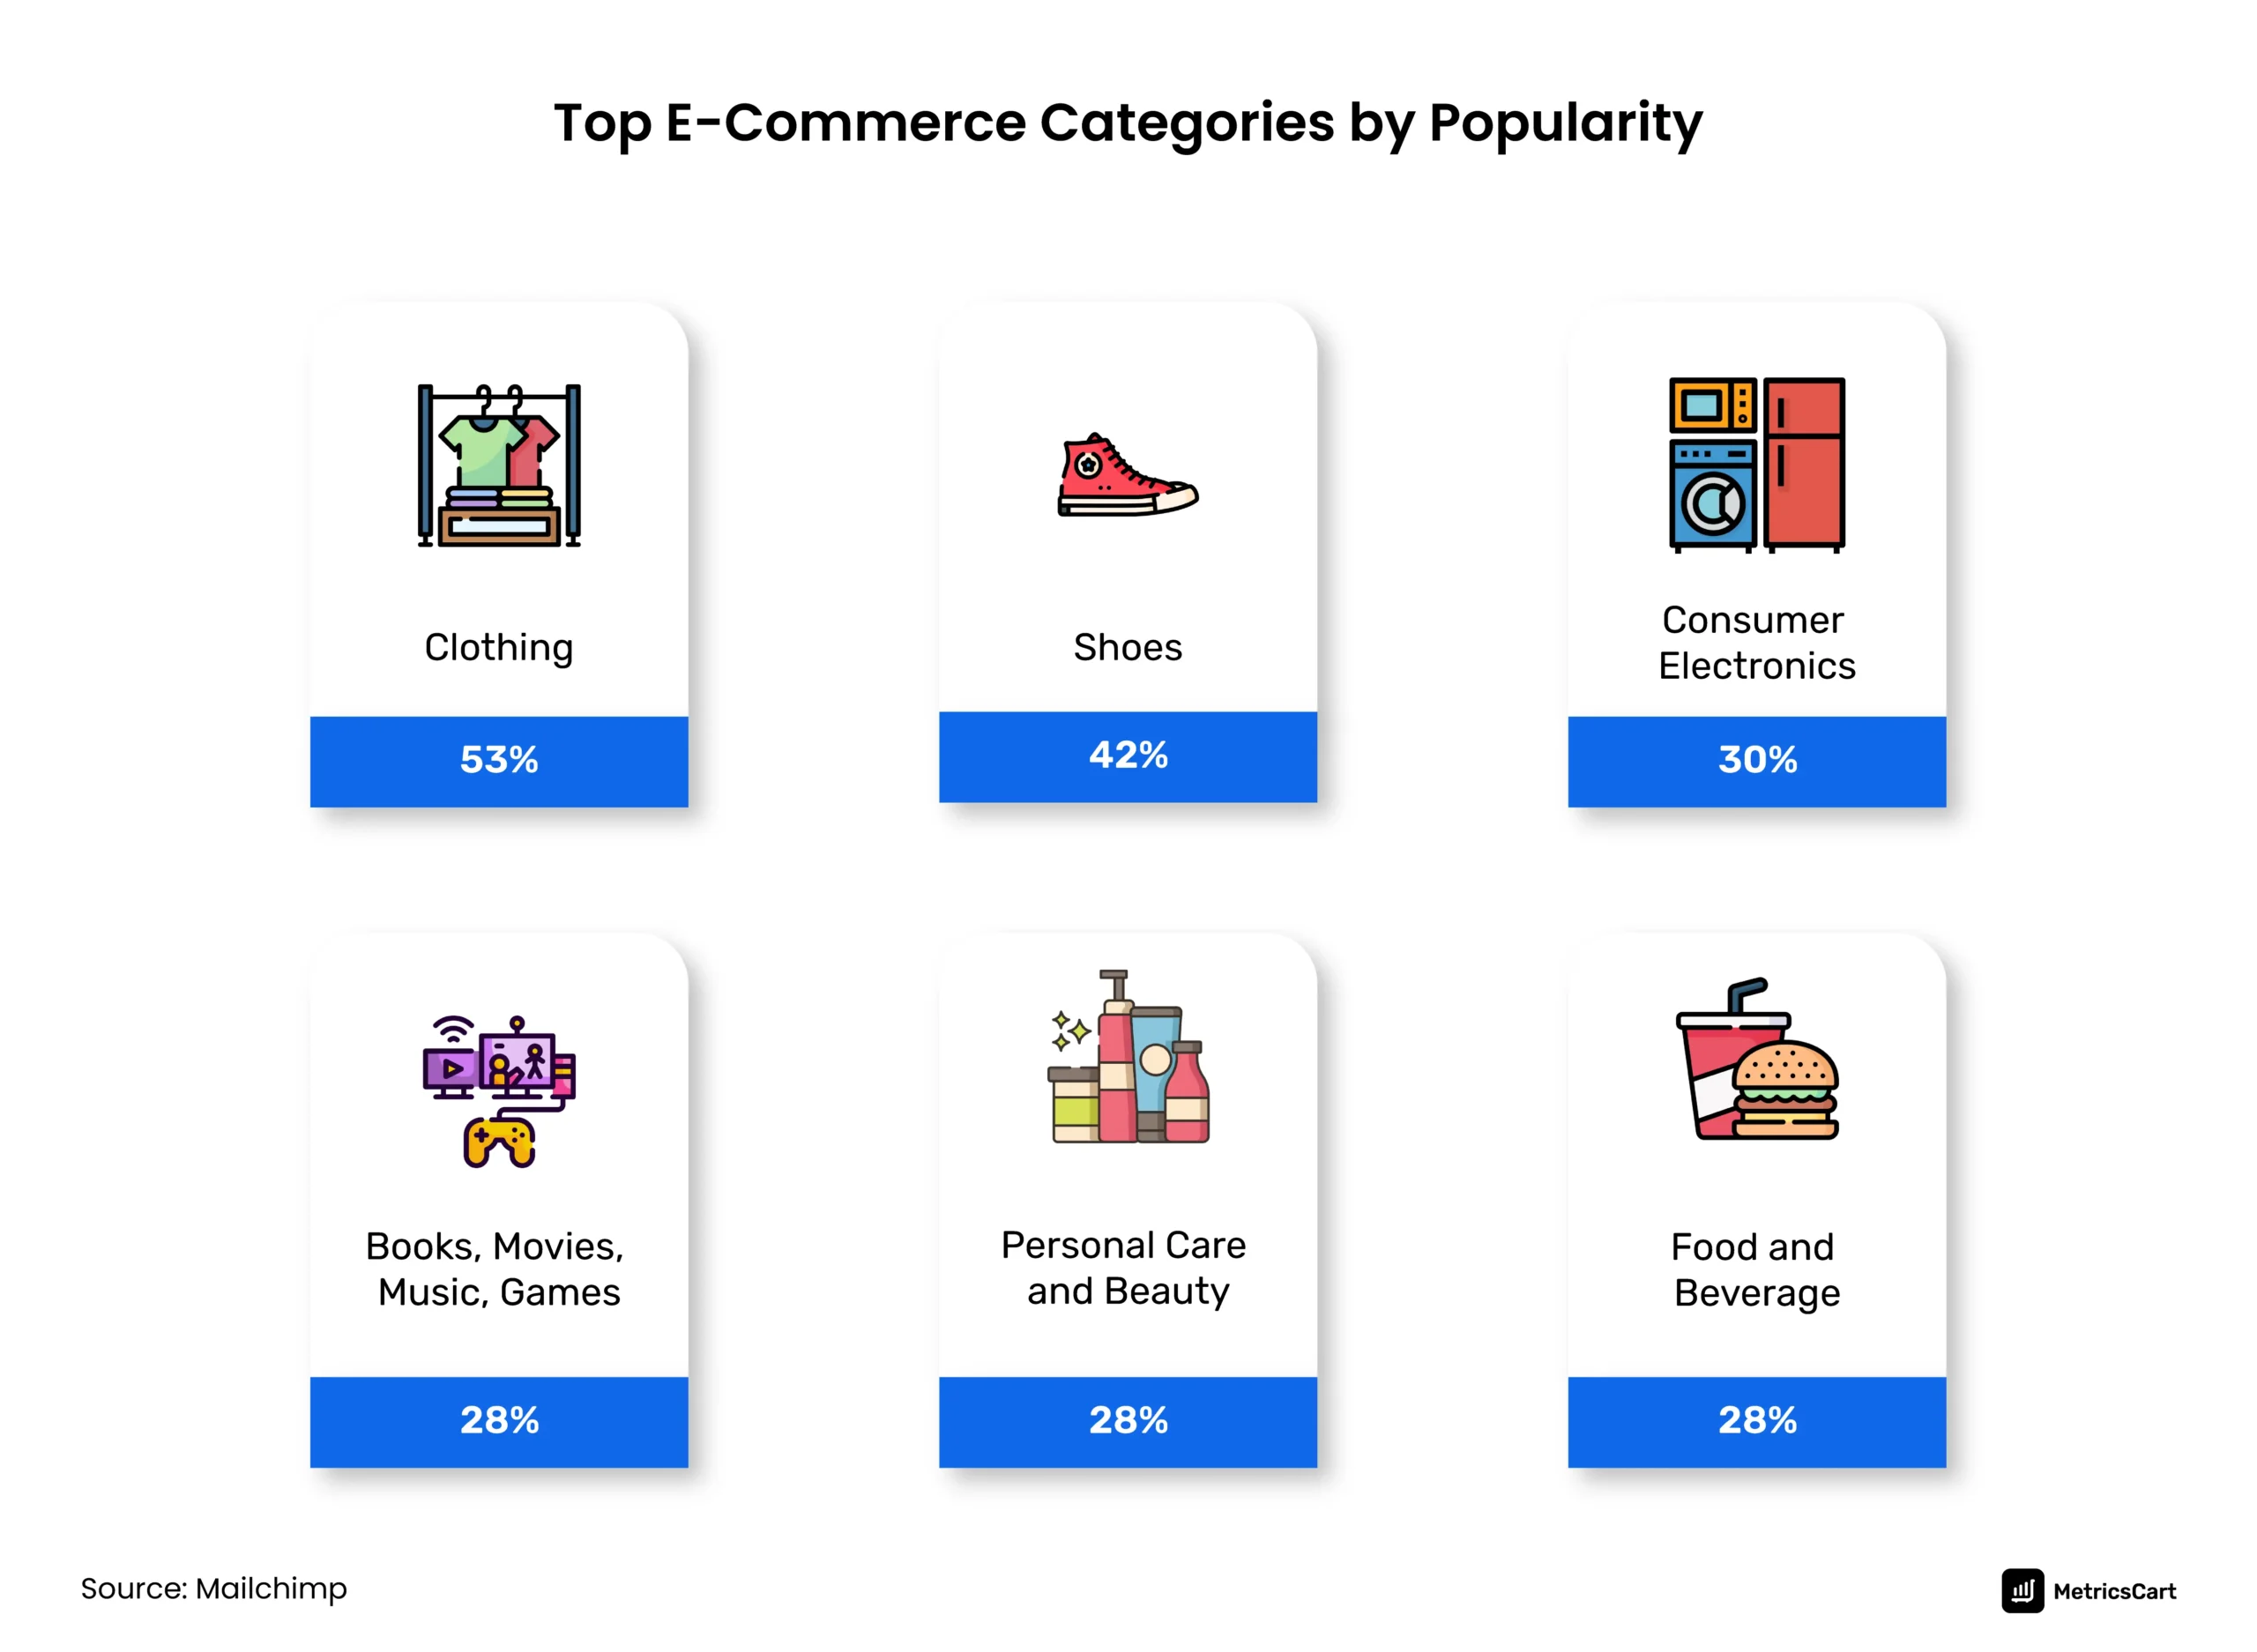 Infographic showing Top E-commerce Categories by Popularity where clothing and shoes top the list